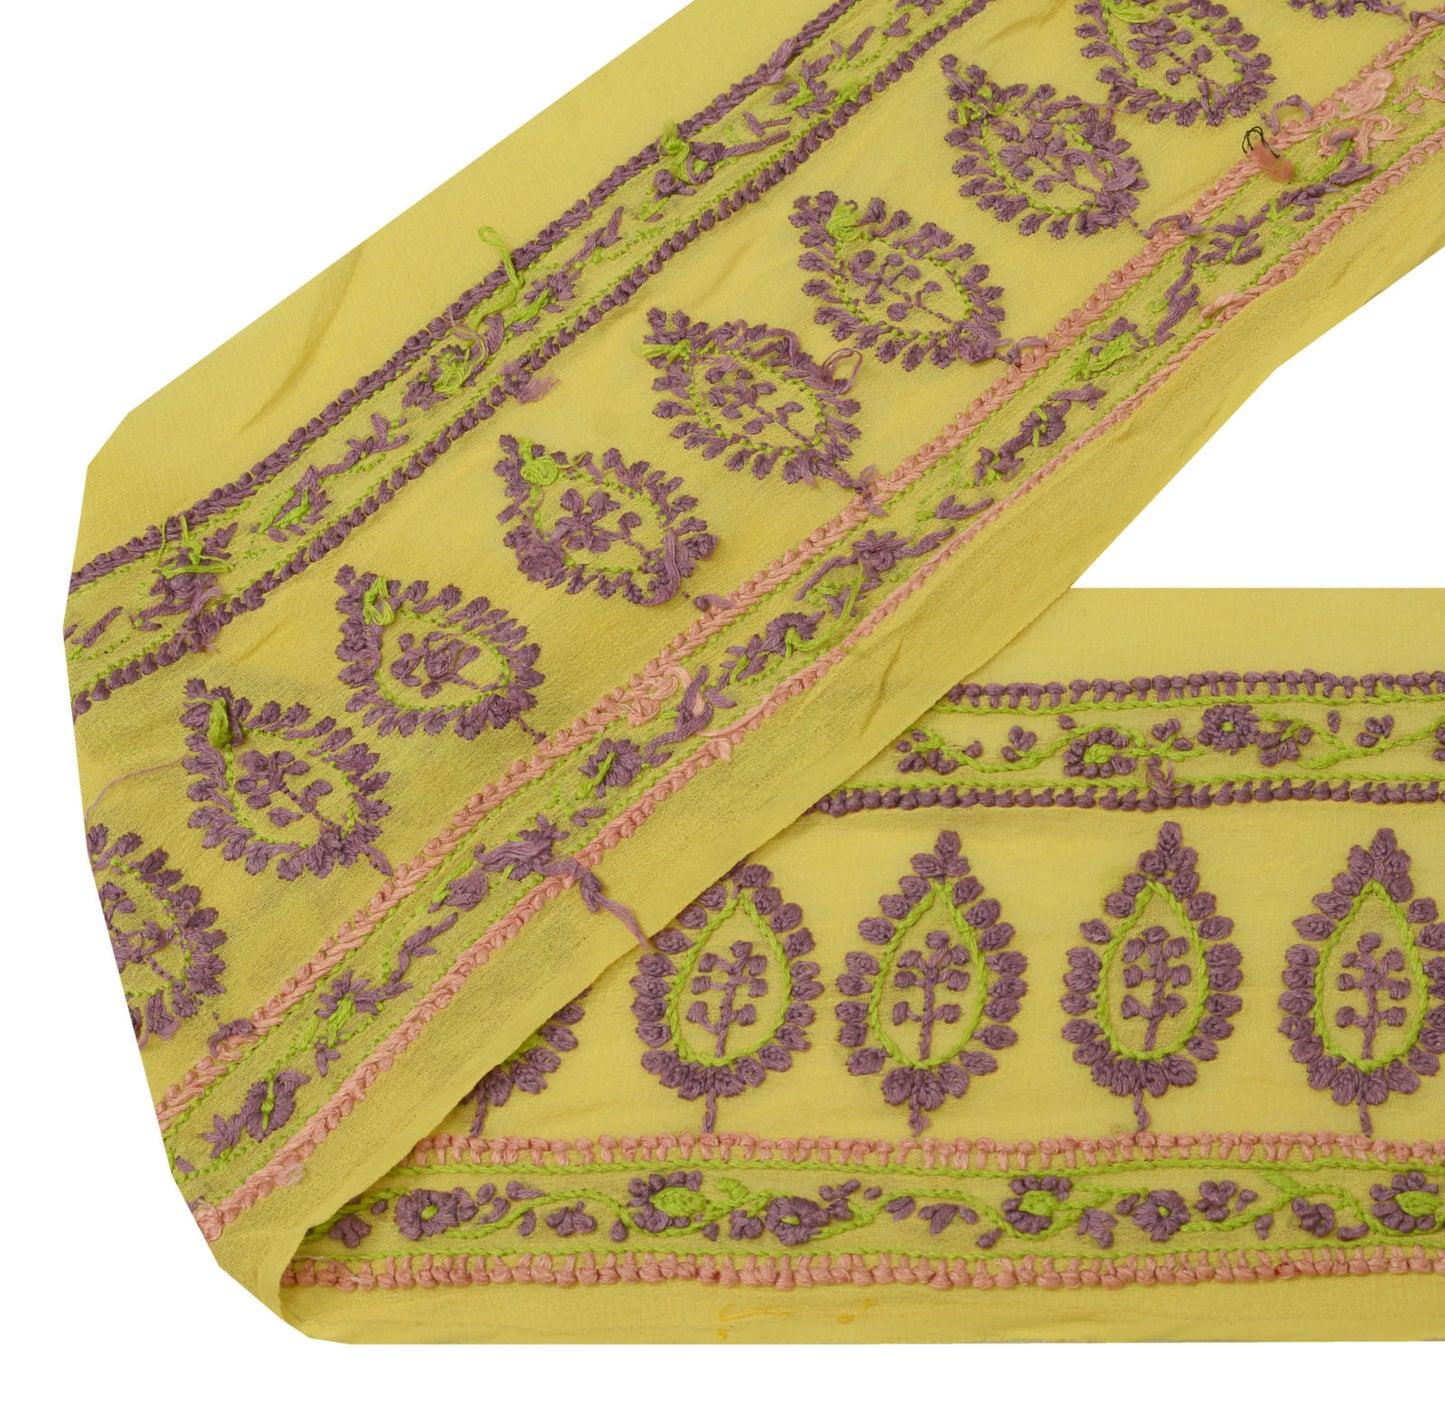 Sushila Vintage Saree Border Indian Craft Sewing Trim Embroidered Lace Ribbon